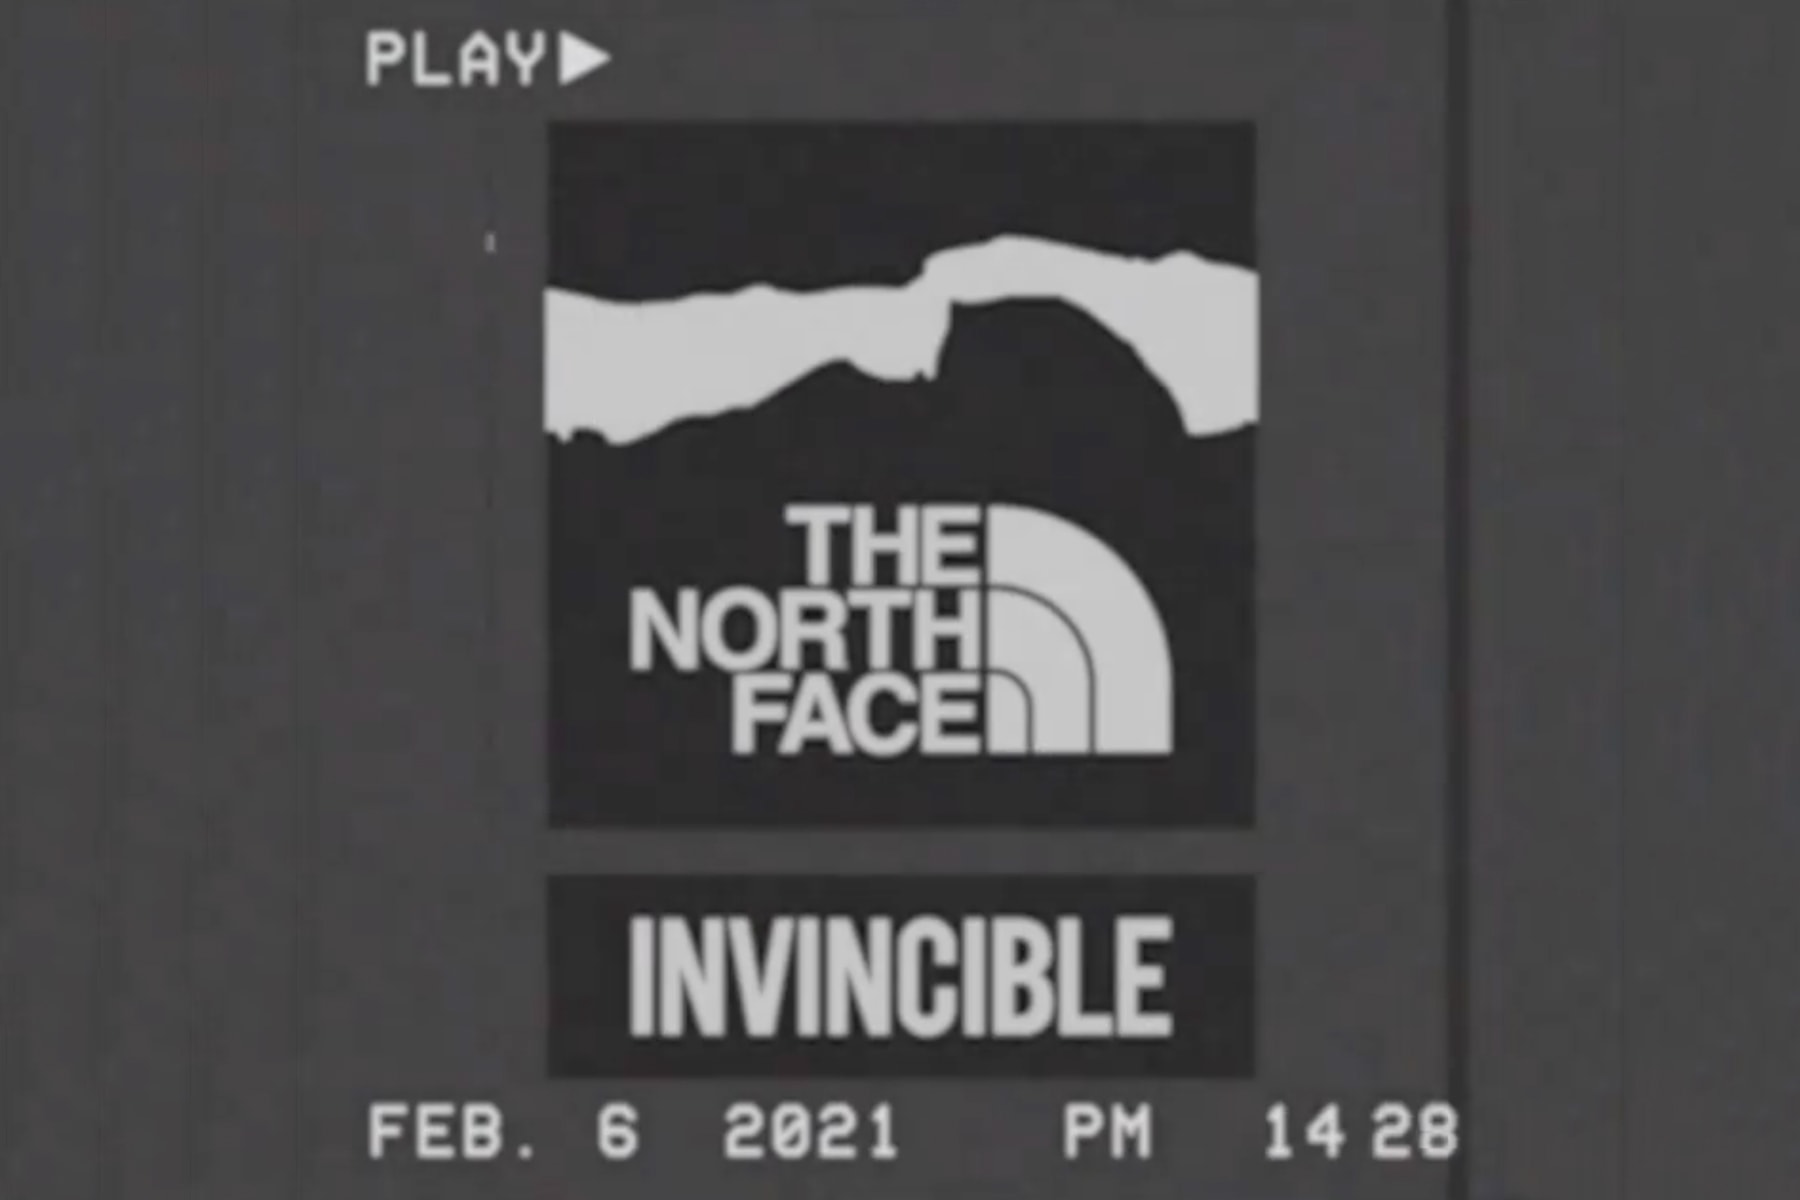 INVINCIBLE 揭露 THE NORTH FACE 2021 全新春夏別注系列預告